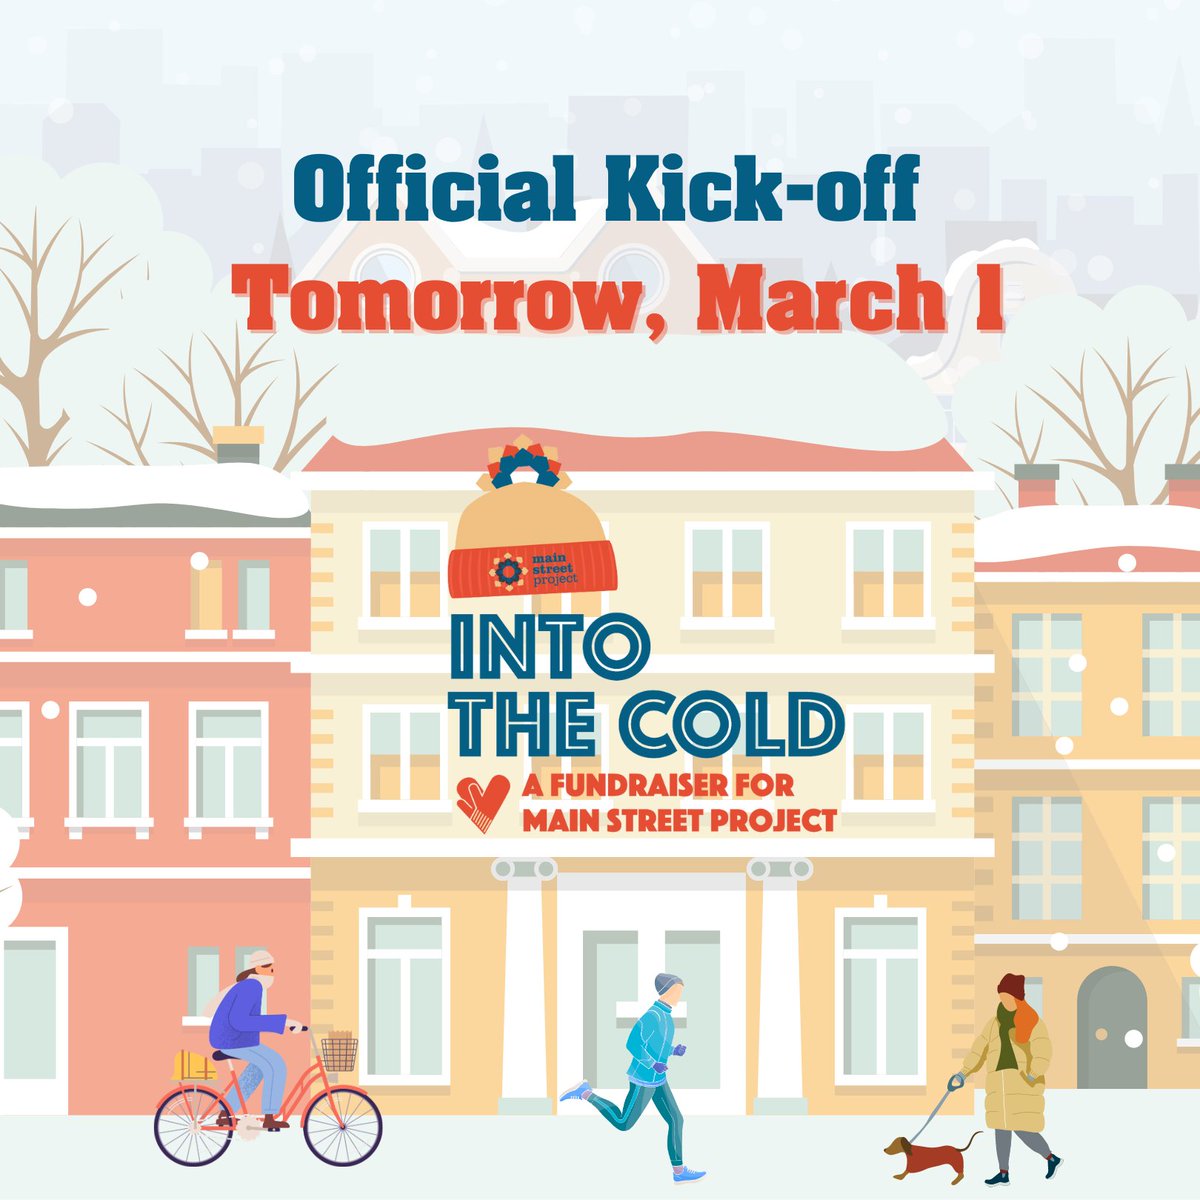 Calling all winter cyclist, hikers and outdoor adventurers! ❄️ Into the Cold officially kicks off tomorrow March 1. Visit ow.ly/u4eY50QJxLj to get registered and start fundraising! #MSPBuildingStability #IntoTheCold #Manitoba #Winnipeg